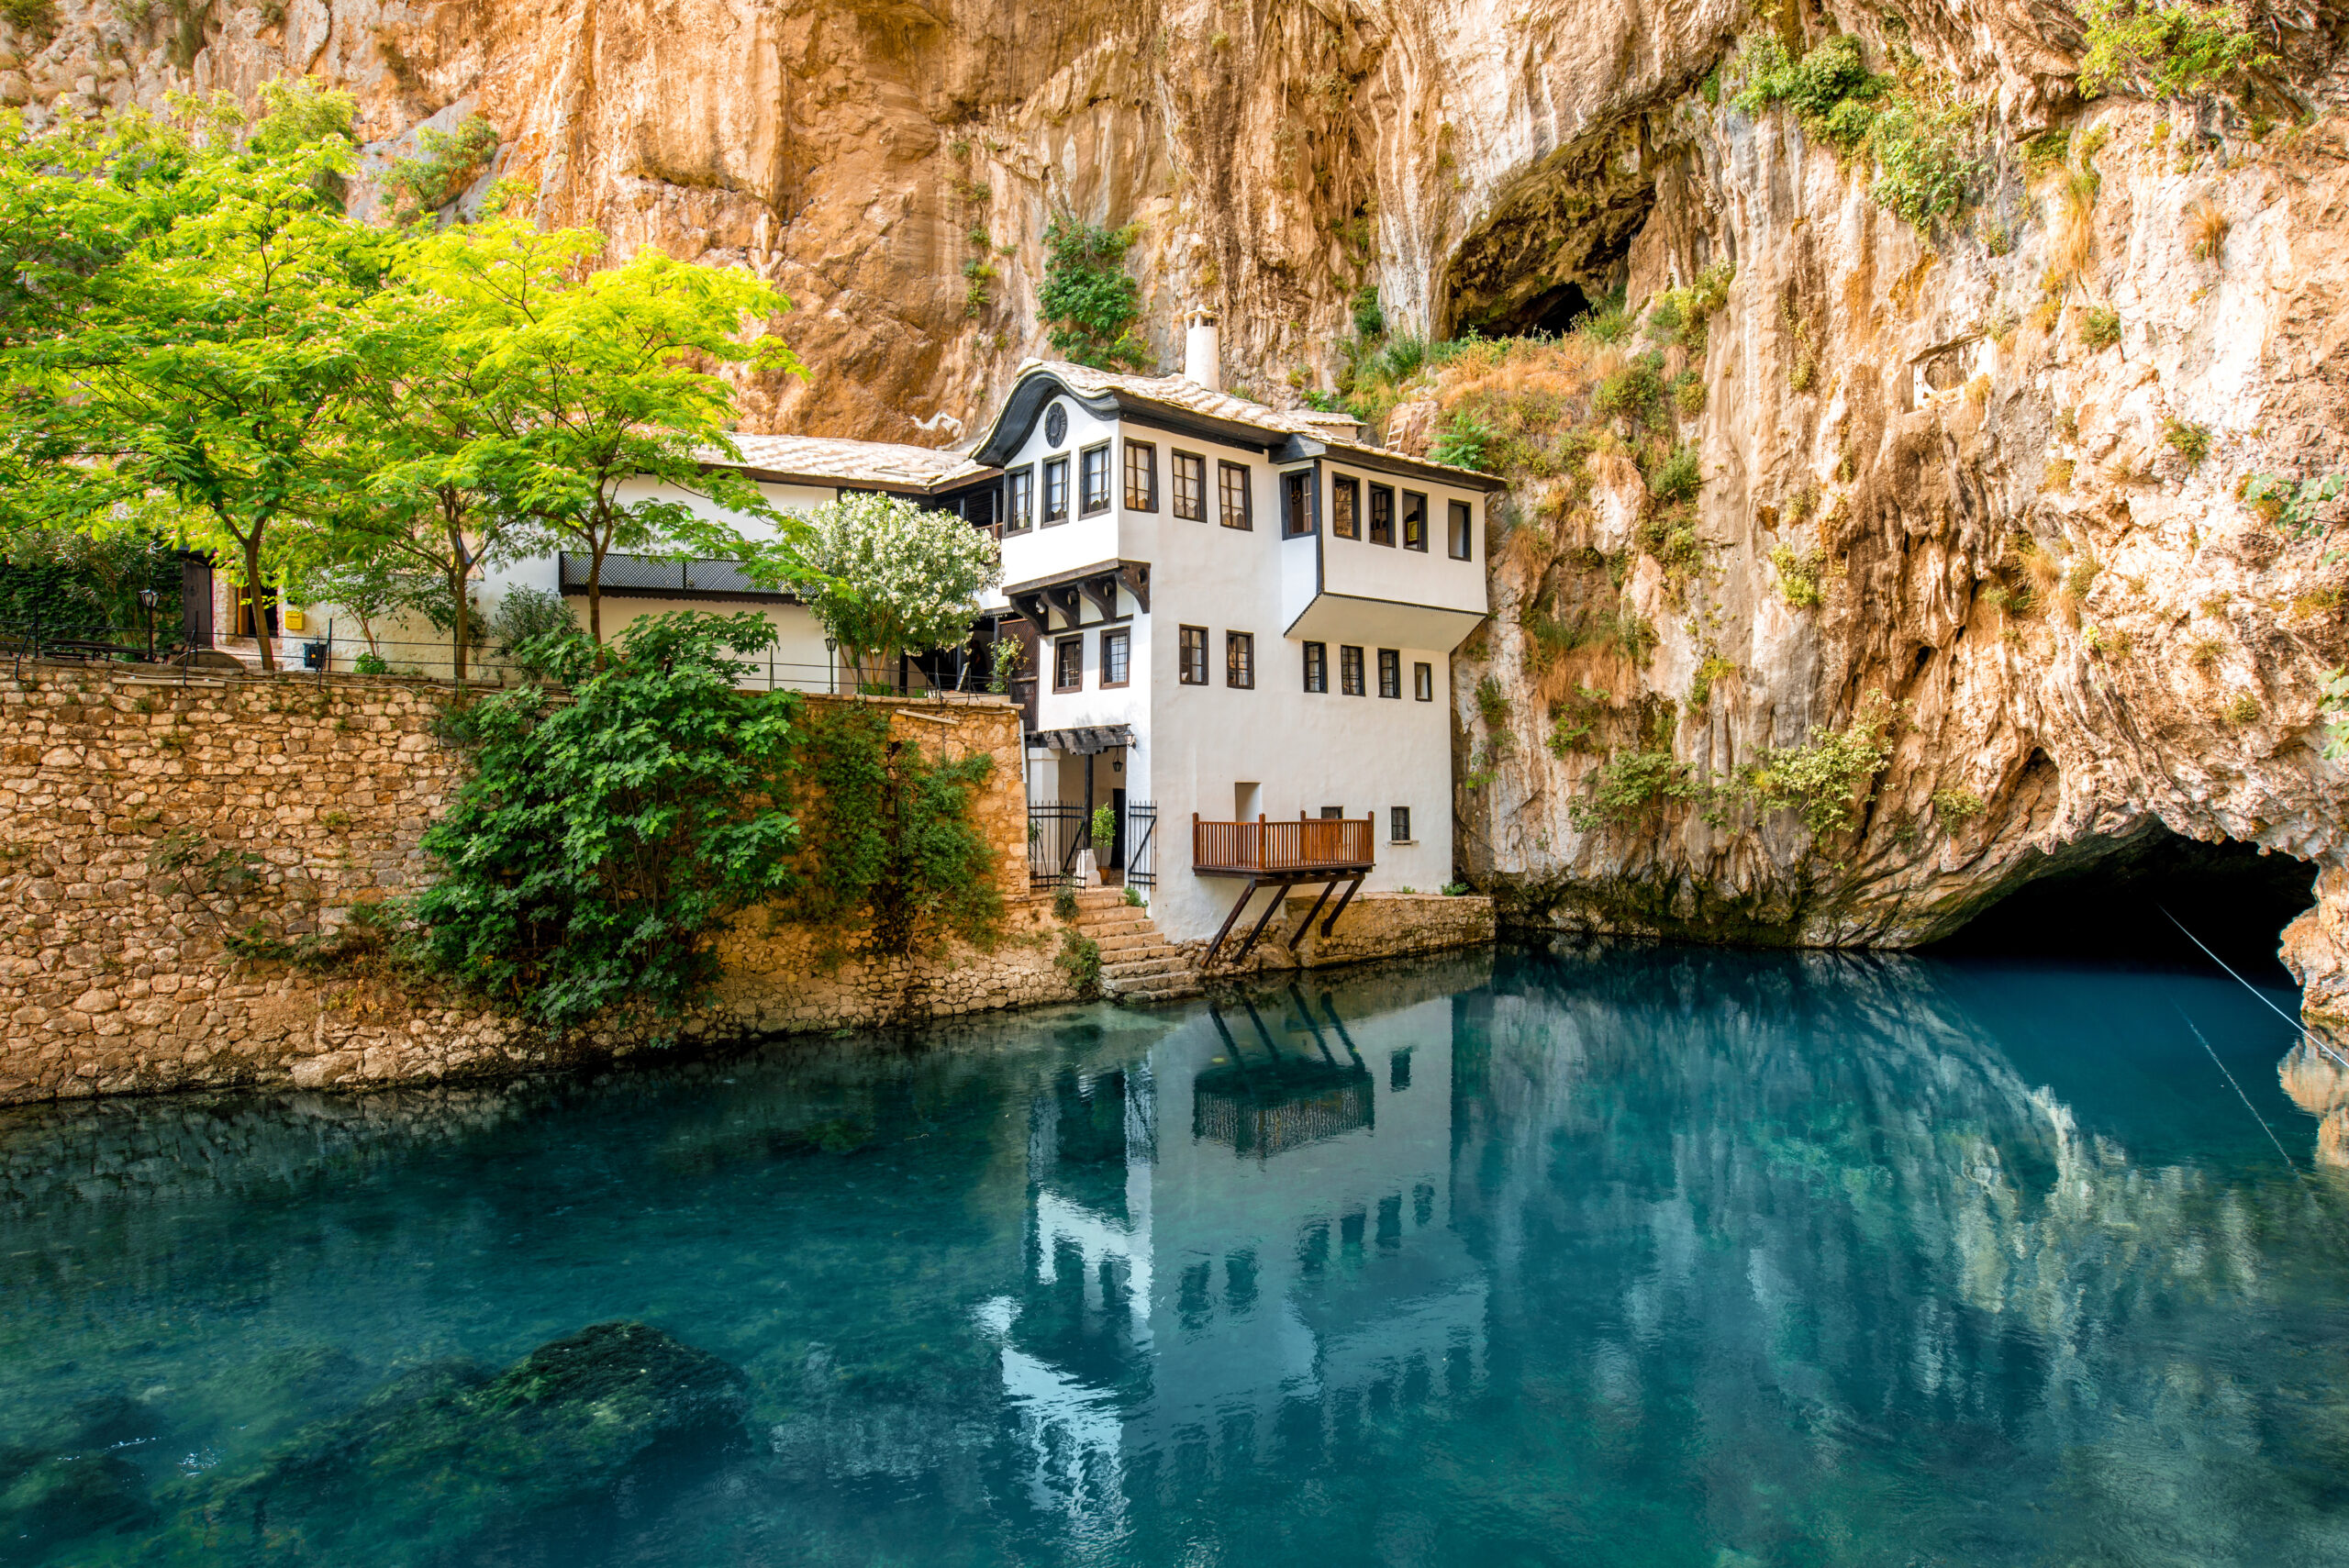 ottoman-house-in-village-at-the-water